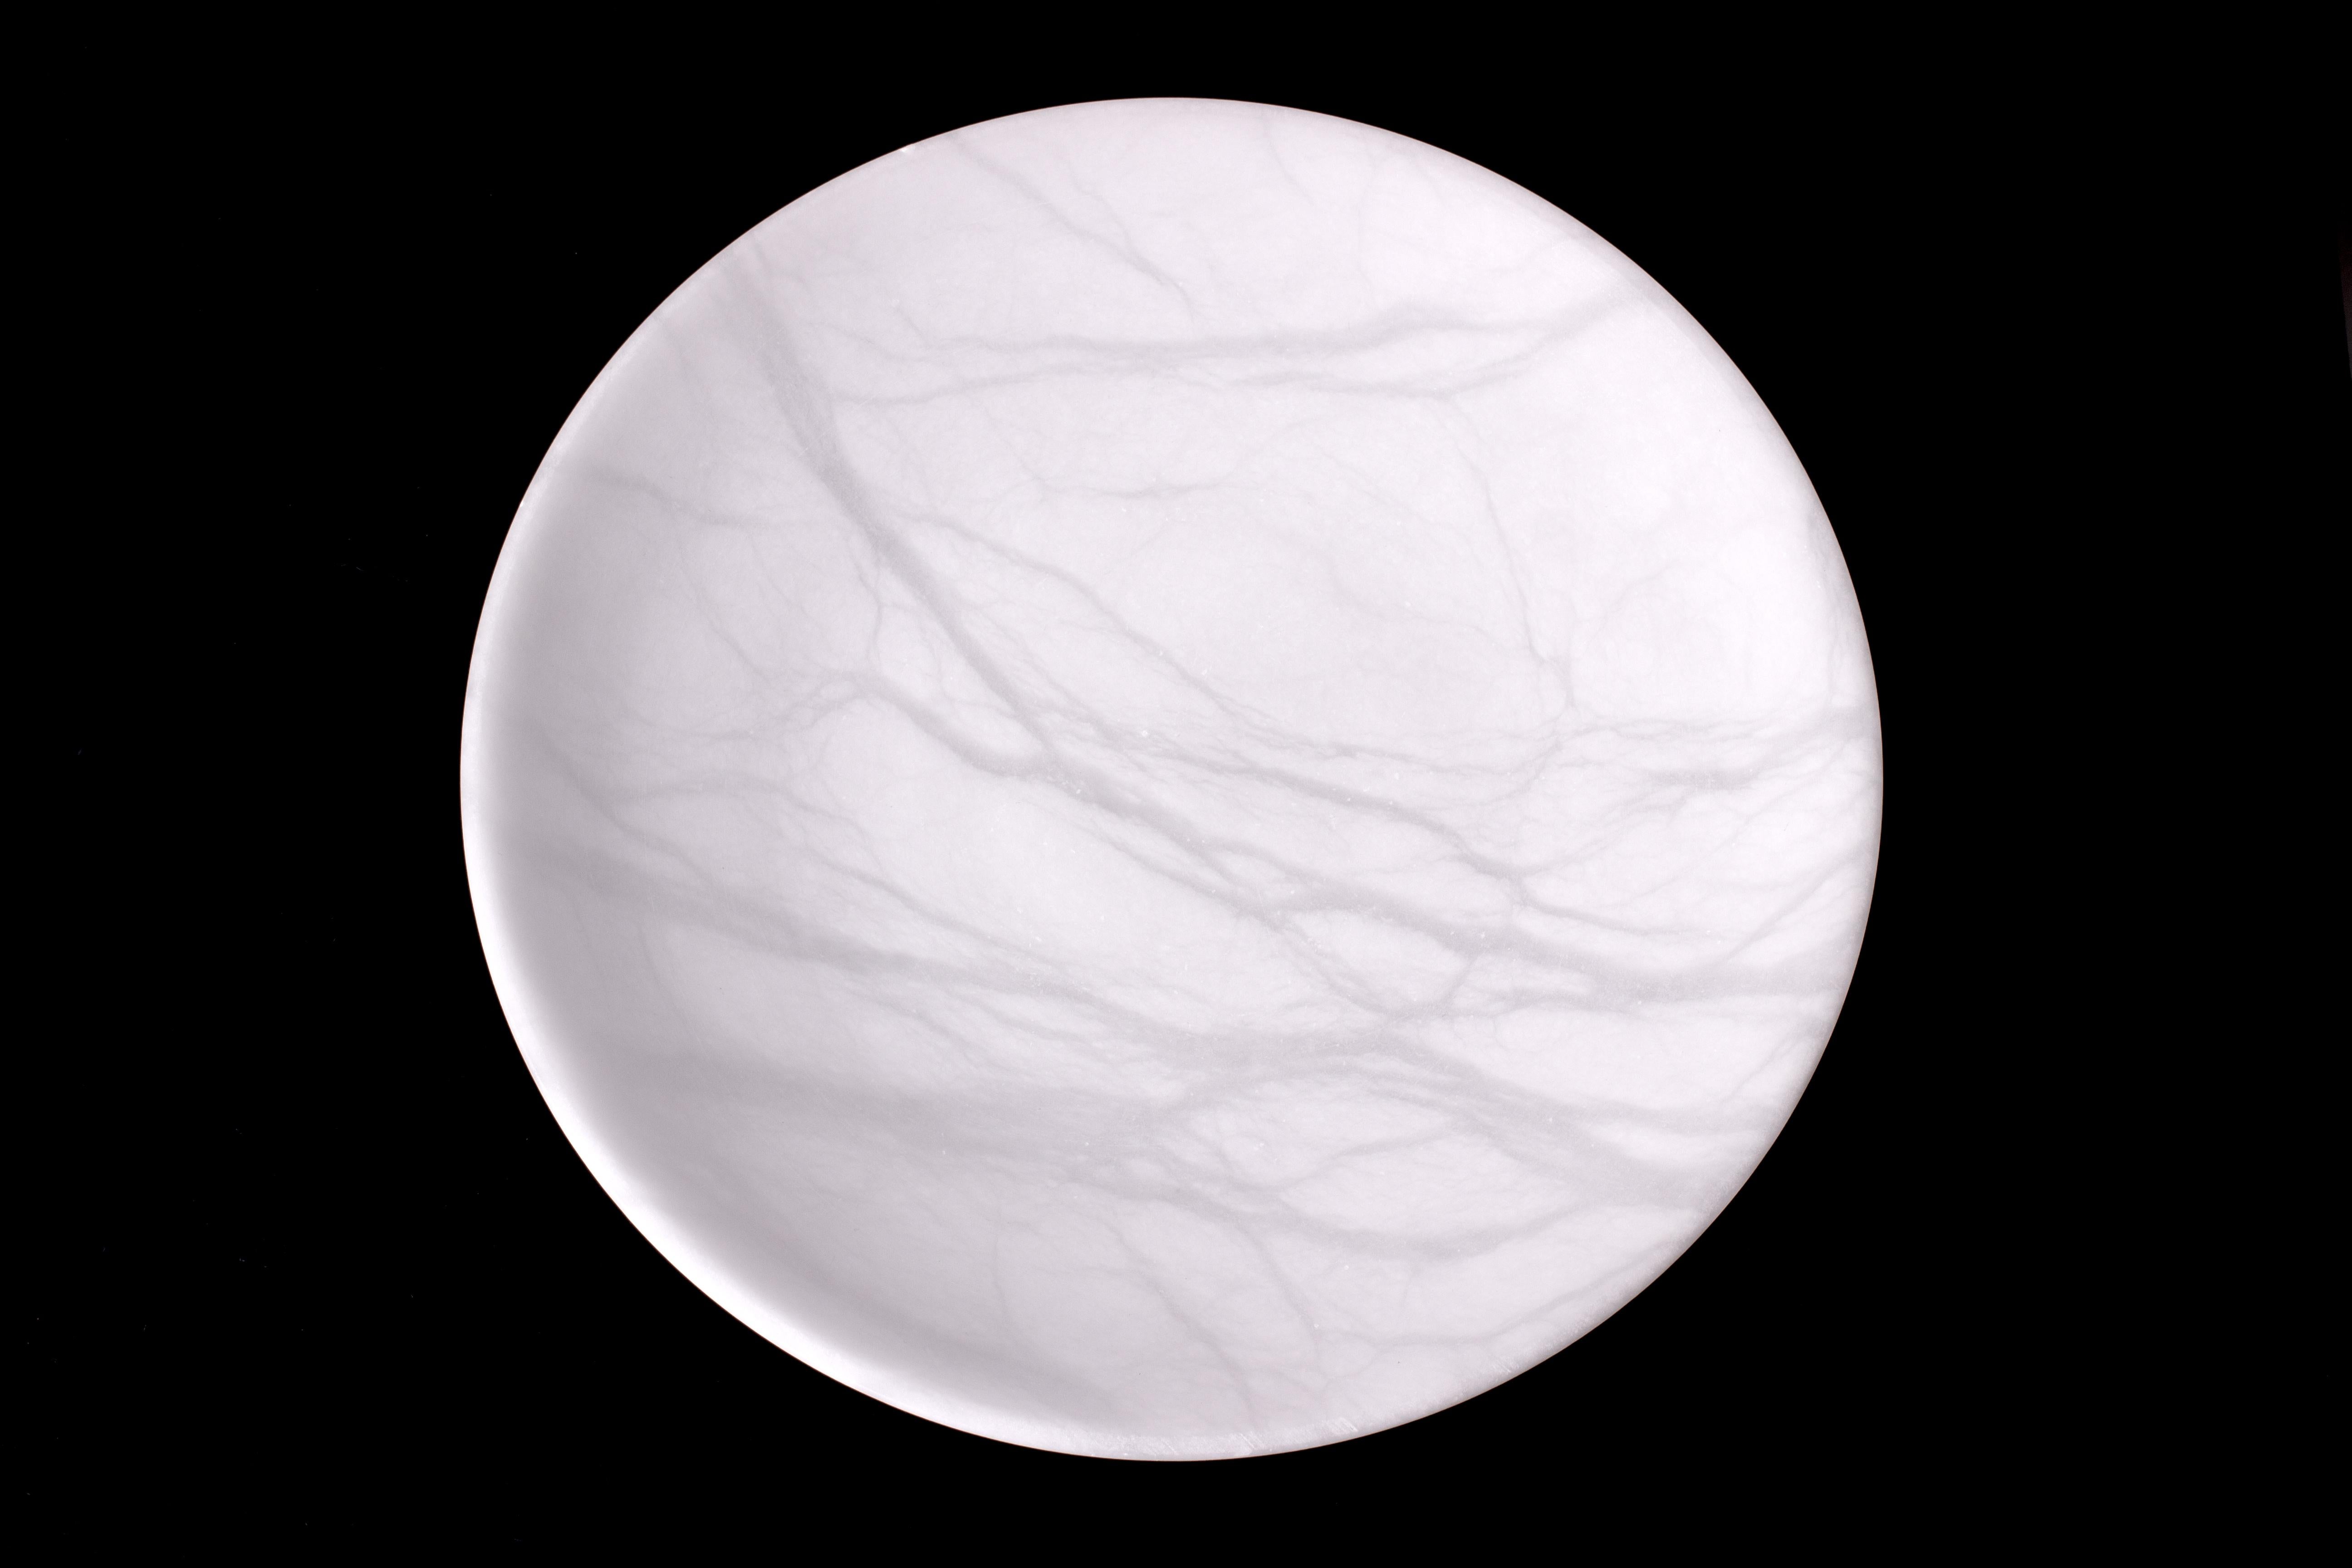 Minimalist sculpted bowl in honed Carrara marble of the fine statuary grade. Pure white stone with white veins of varying transparency. Elegant curved shape with consistent thickness of stone across the dish.